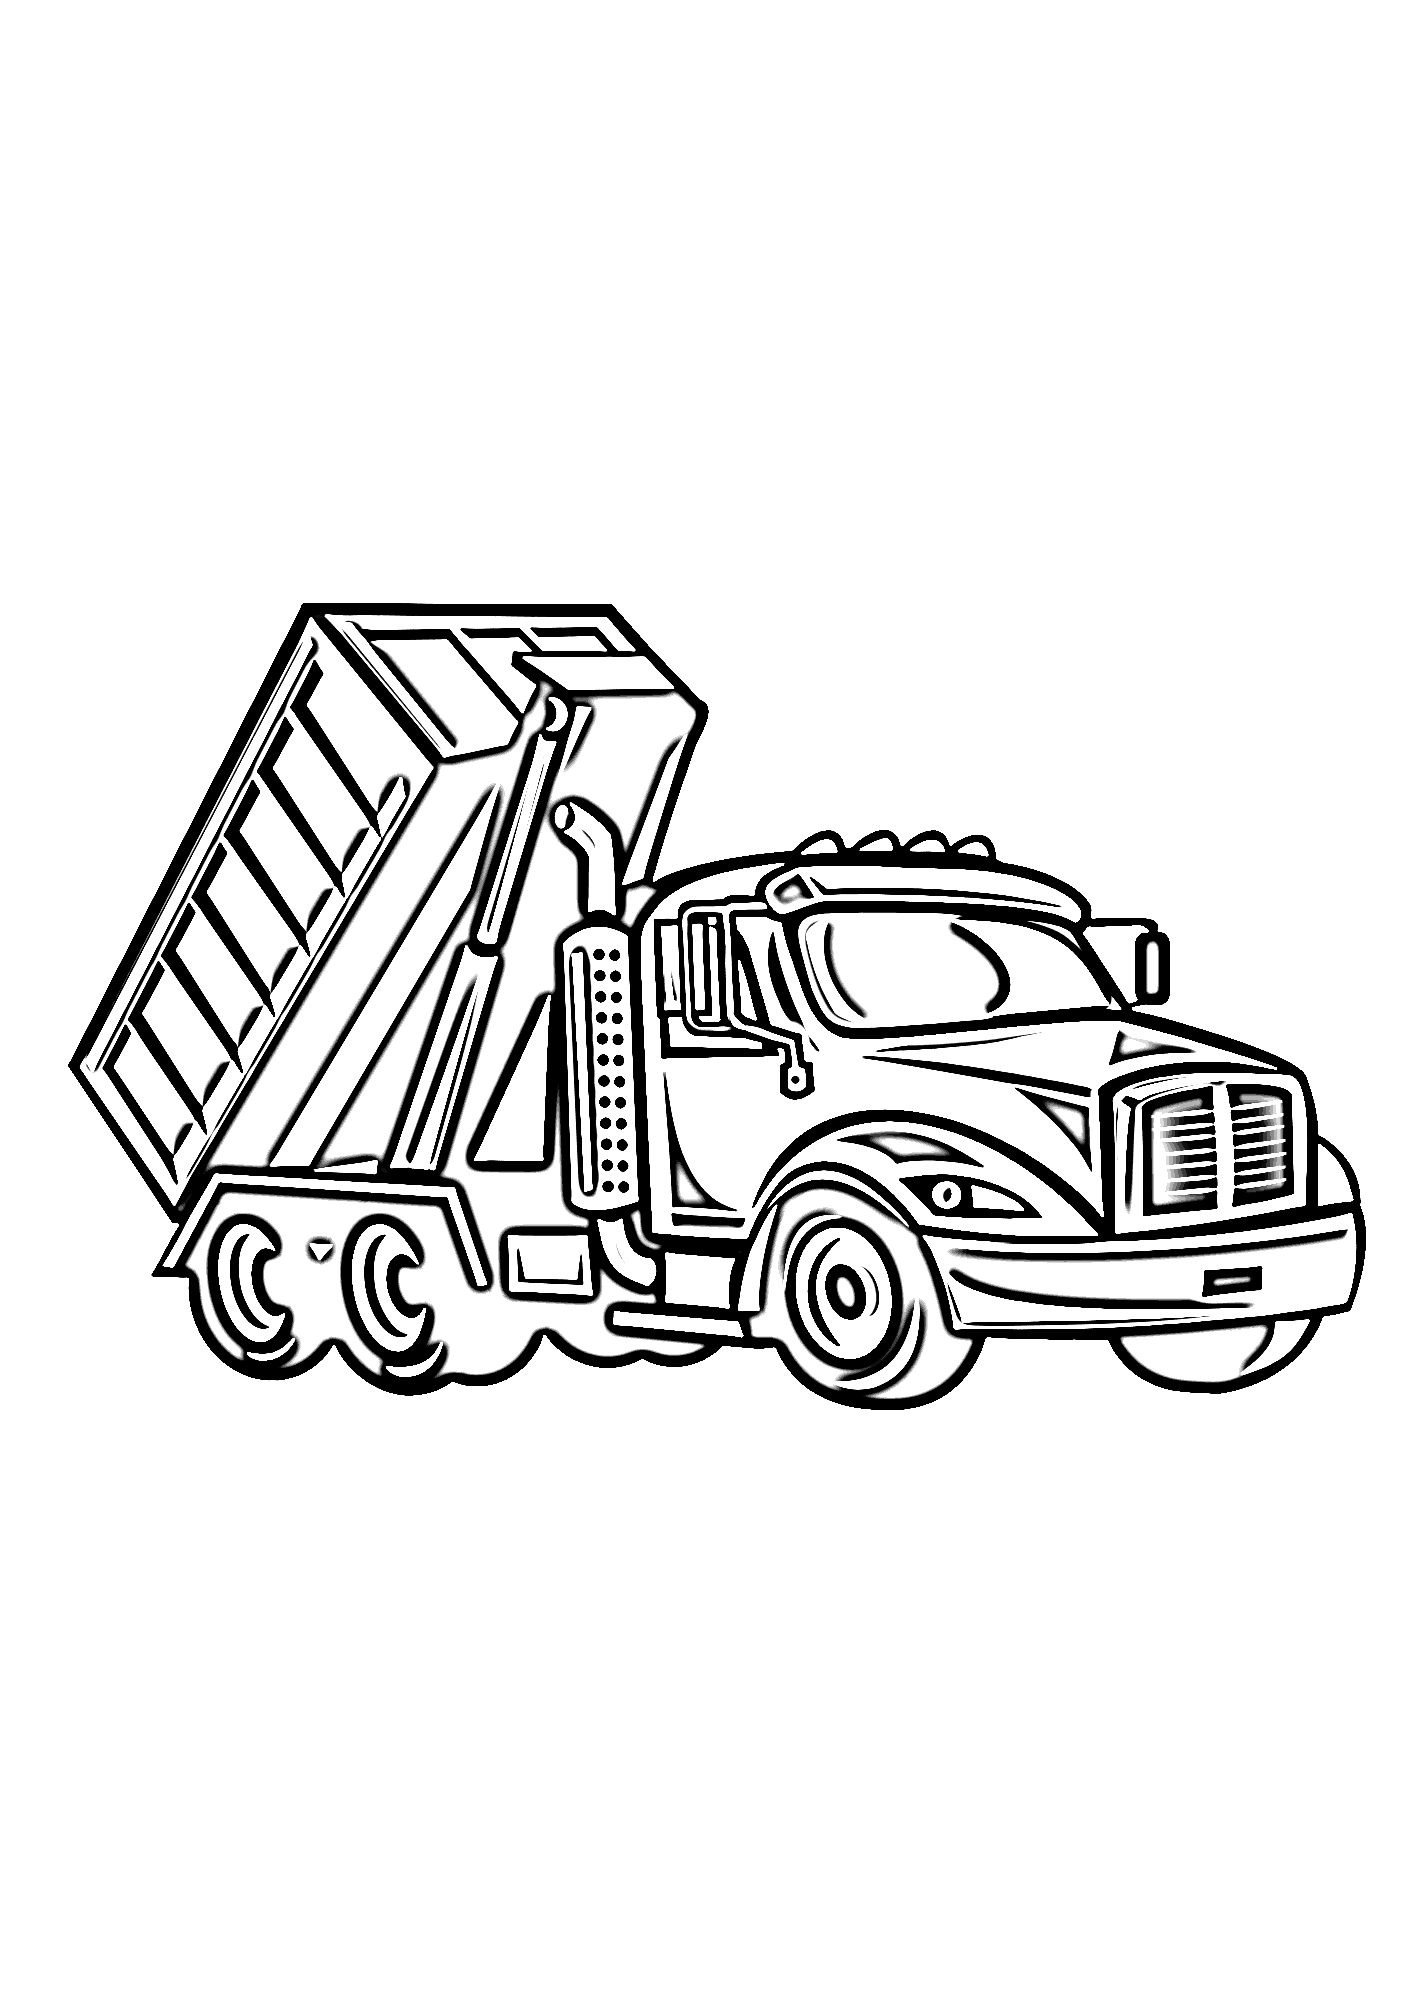 Roll-off Truck Bin Truck Coloring Pages